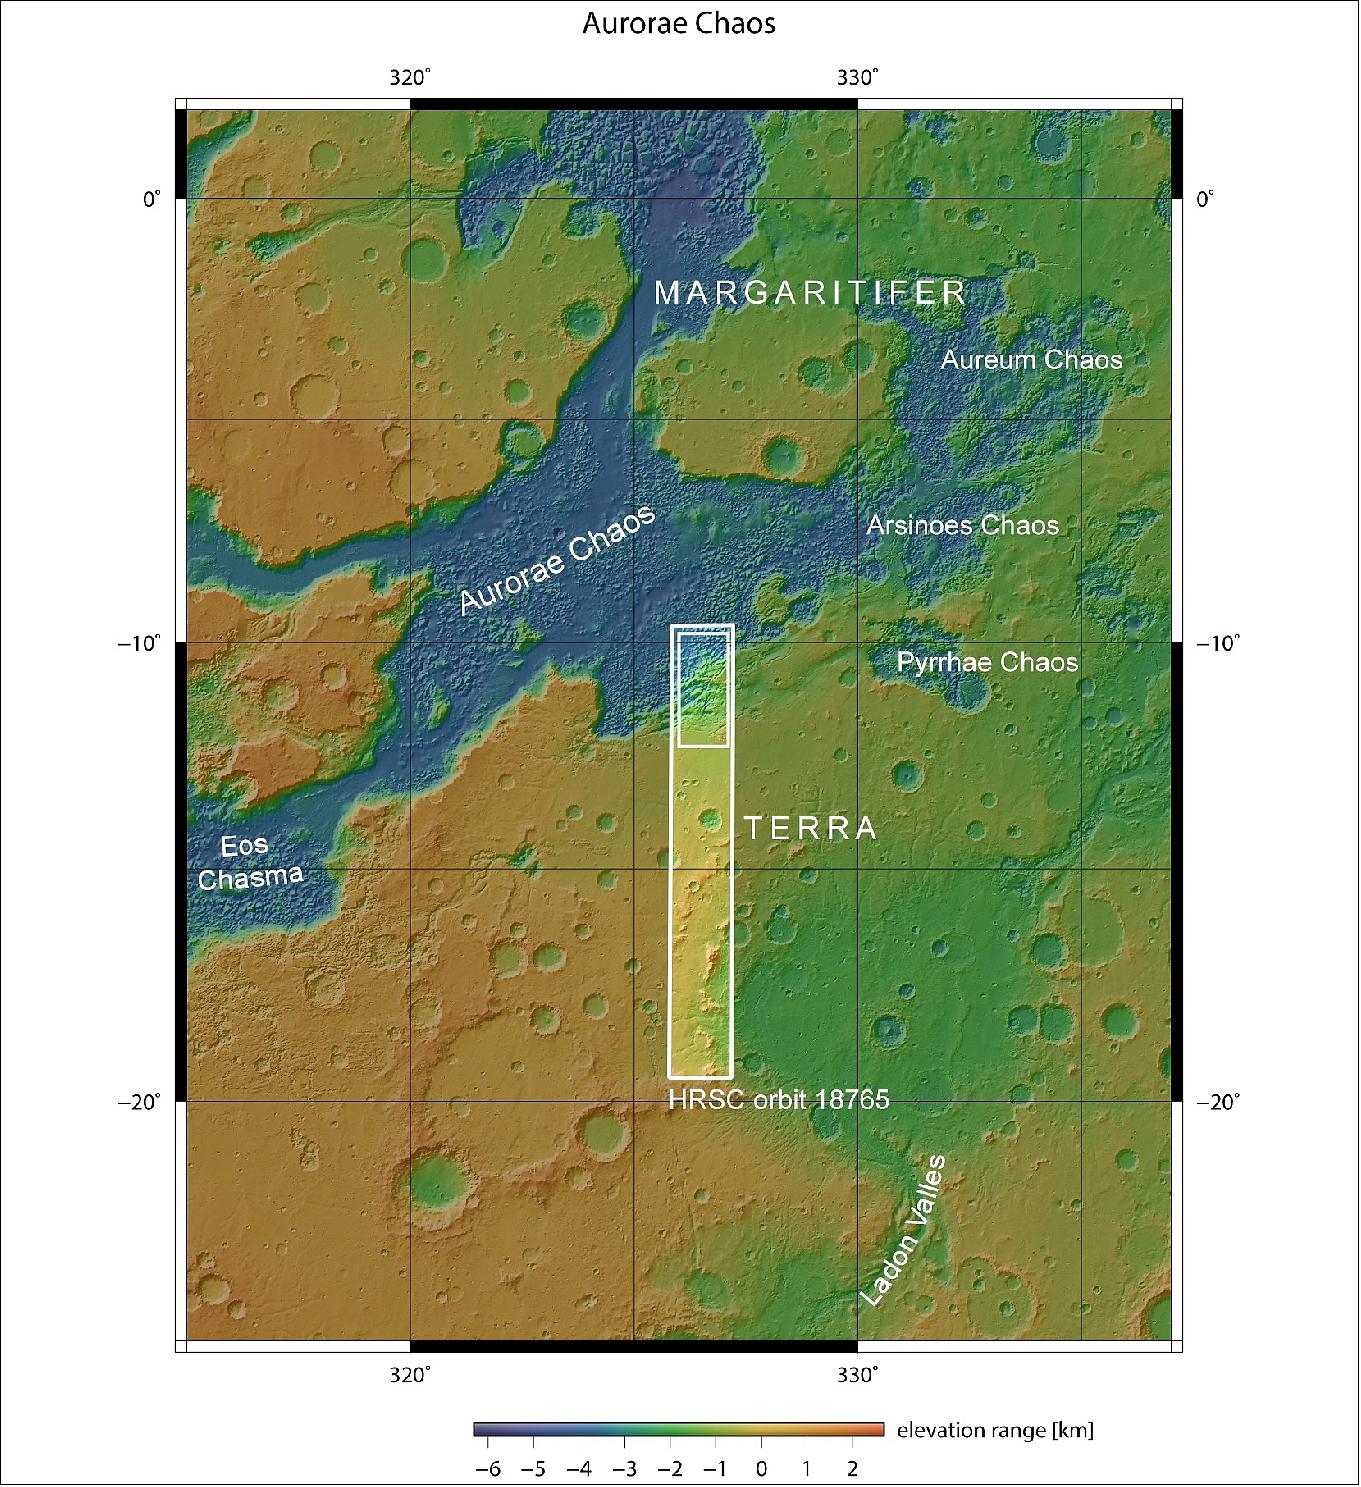 Figure 30: Aurorae Chaos in context. This image shows Aurorae Chaos, a large area of chaotic terrain located in the Margaritifer Terra region on Mars. The region outlined by the bold white box indicates the area imaged by the Mars Express High Resolution Stereo Camera on 31 October 2018 during orbit 18765 (image credit: NASA MGS MOLA Science Team)